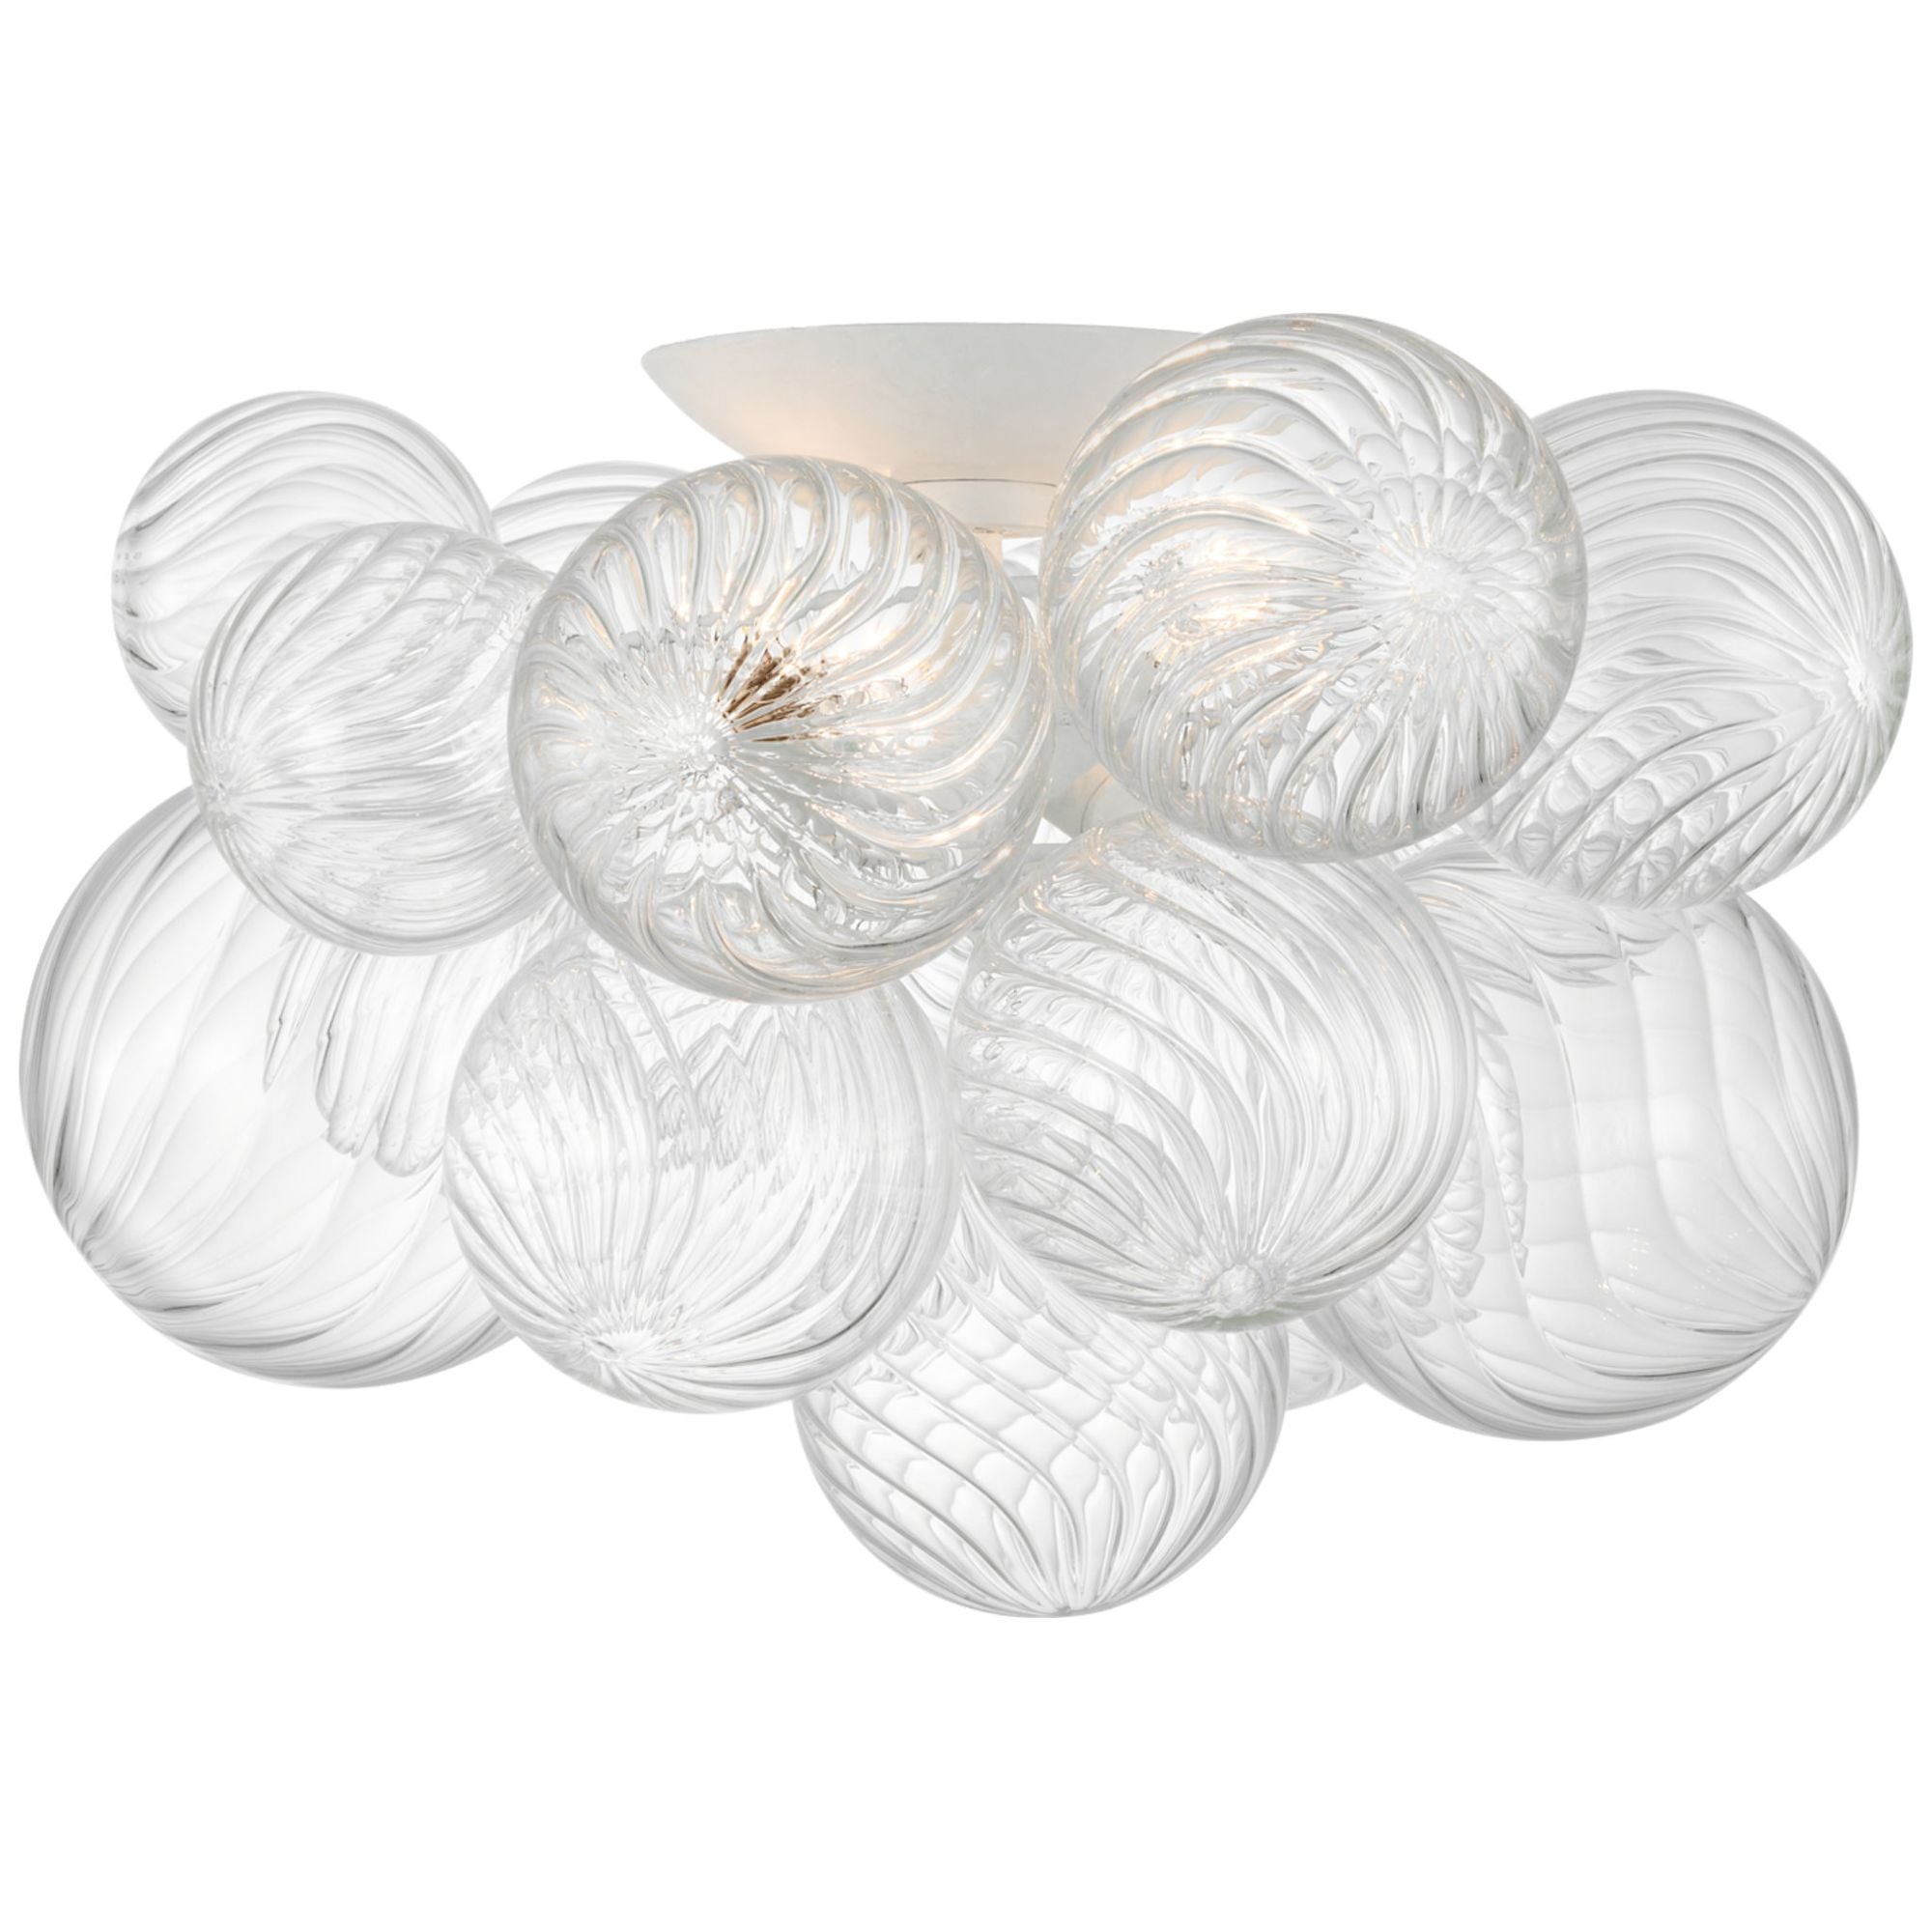 Julie Neill Talia 20 Flush Mount in Plaster White and Clear Swirled Glass